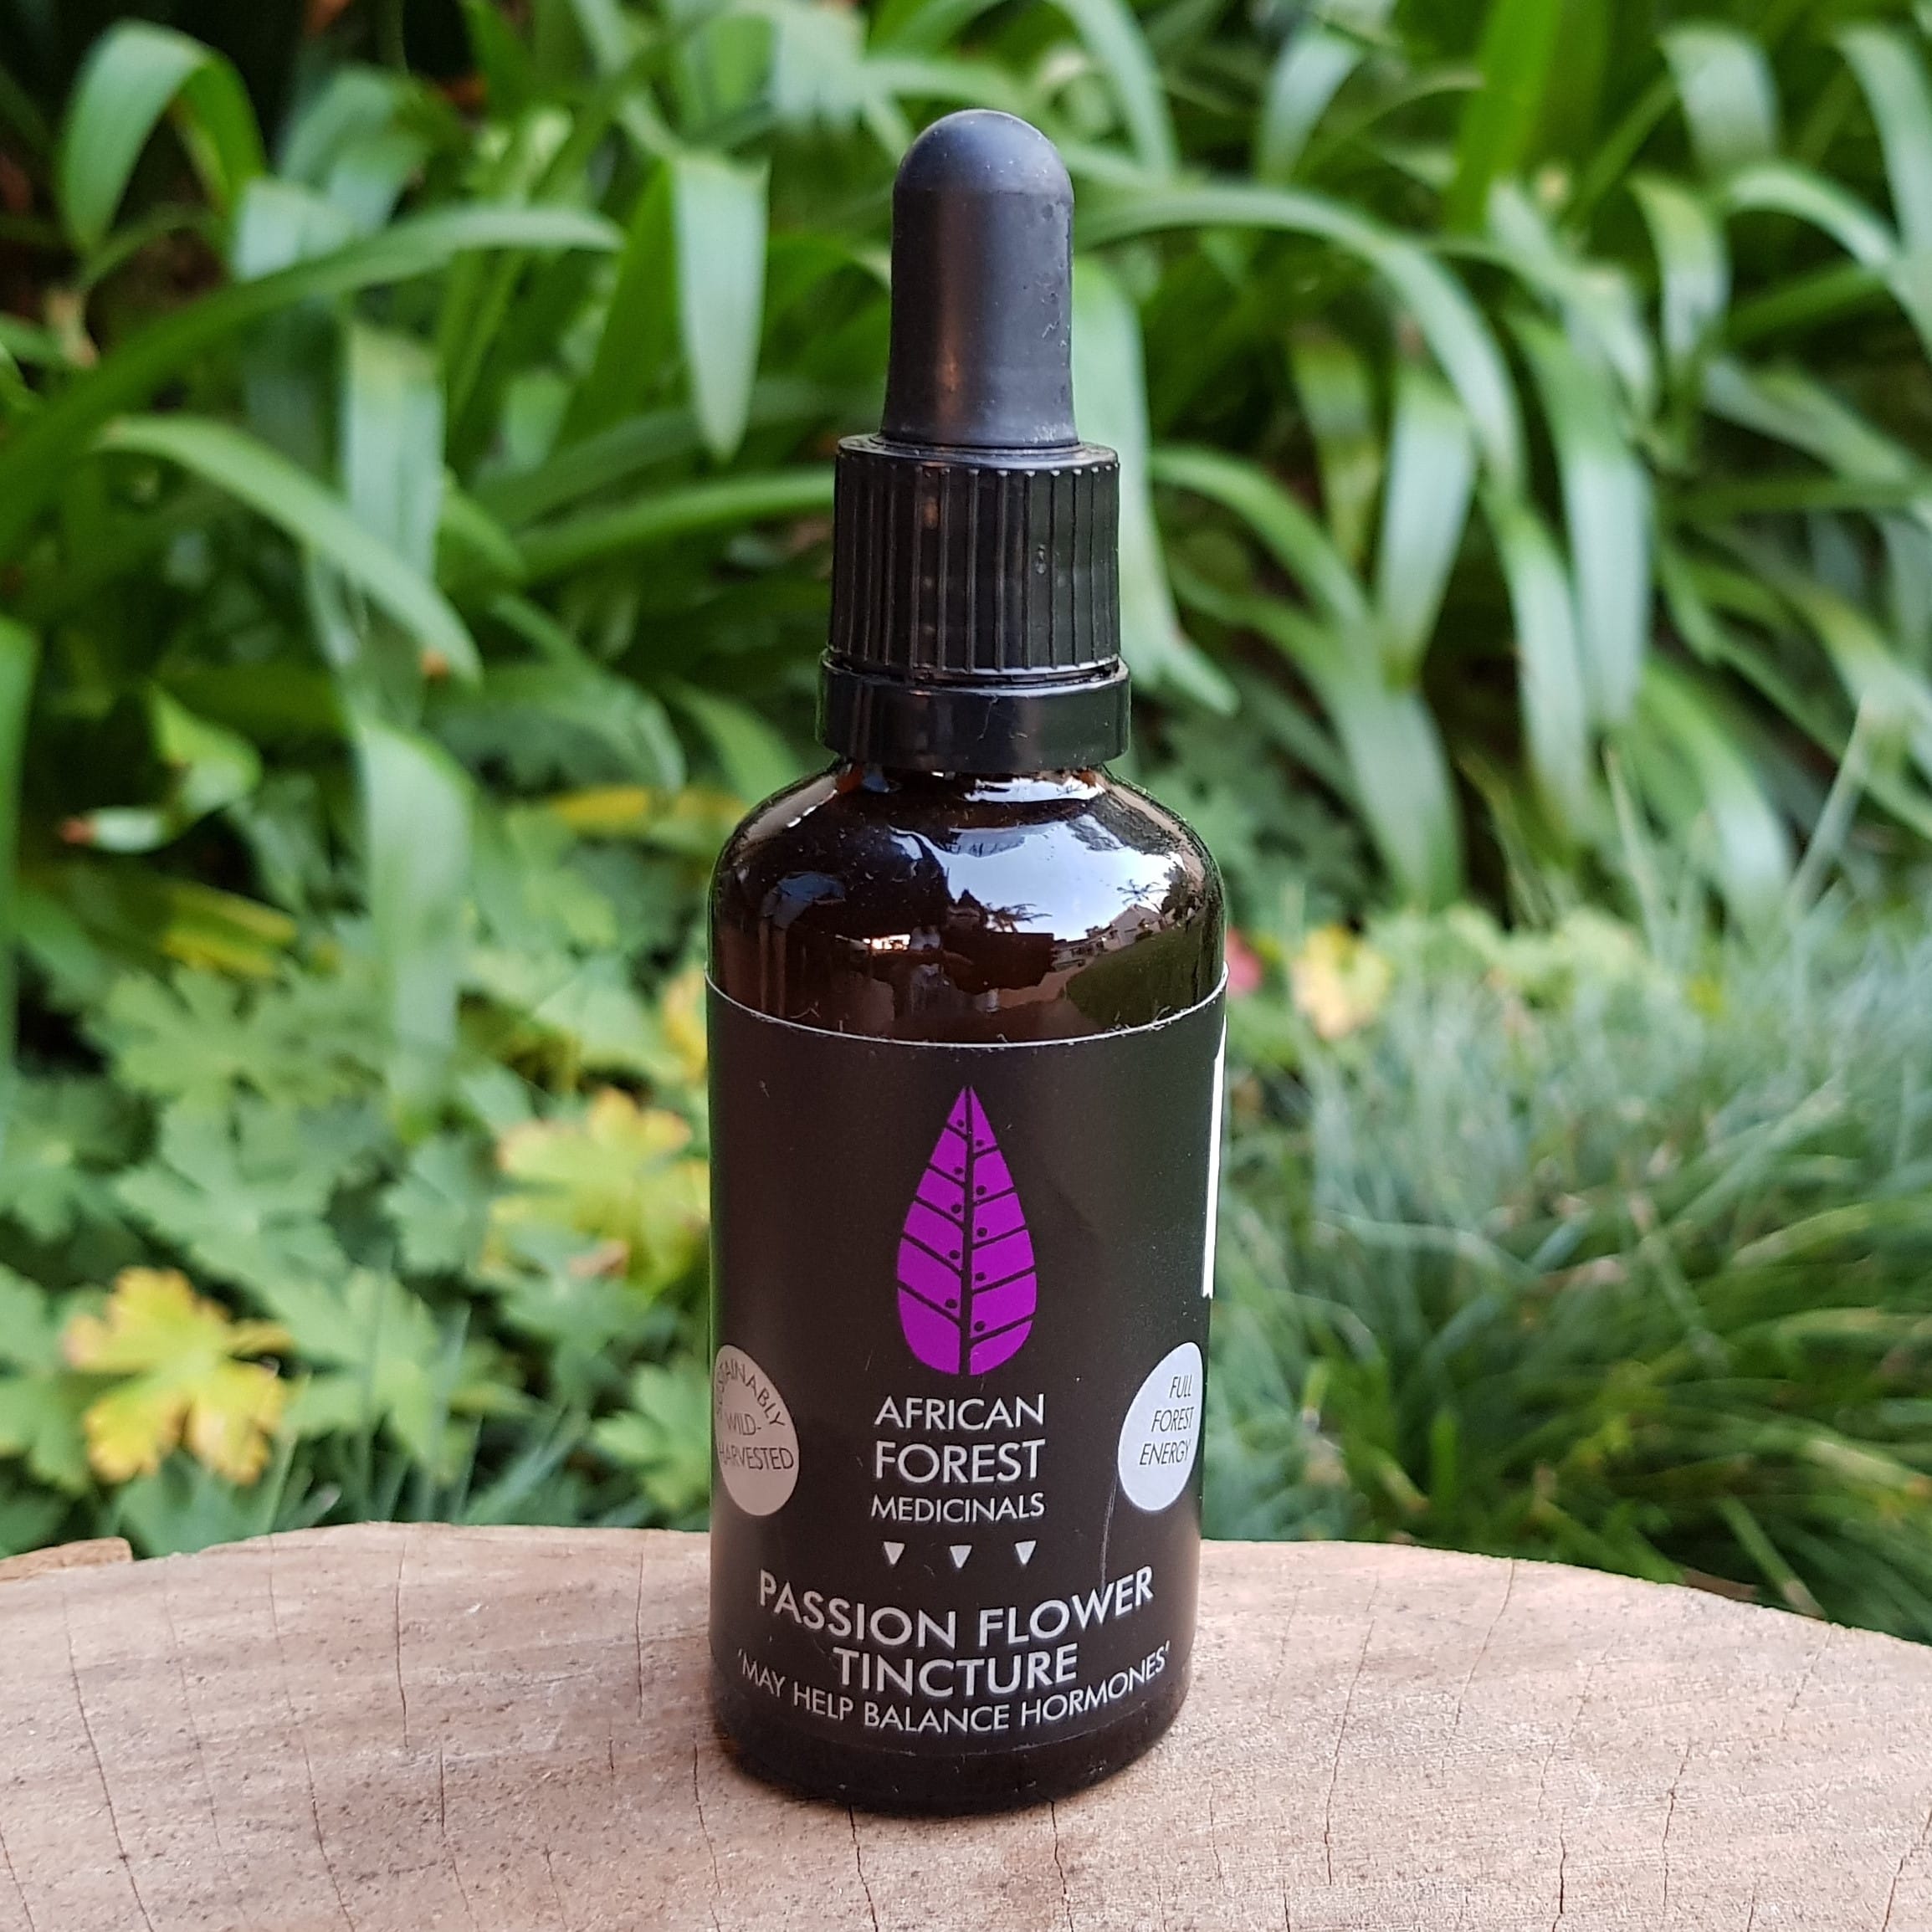 passion flower tincture (african forest medicinals)